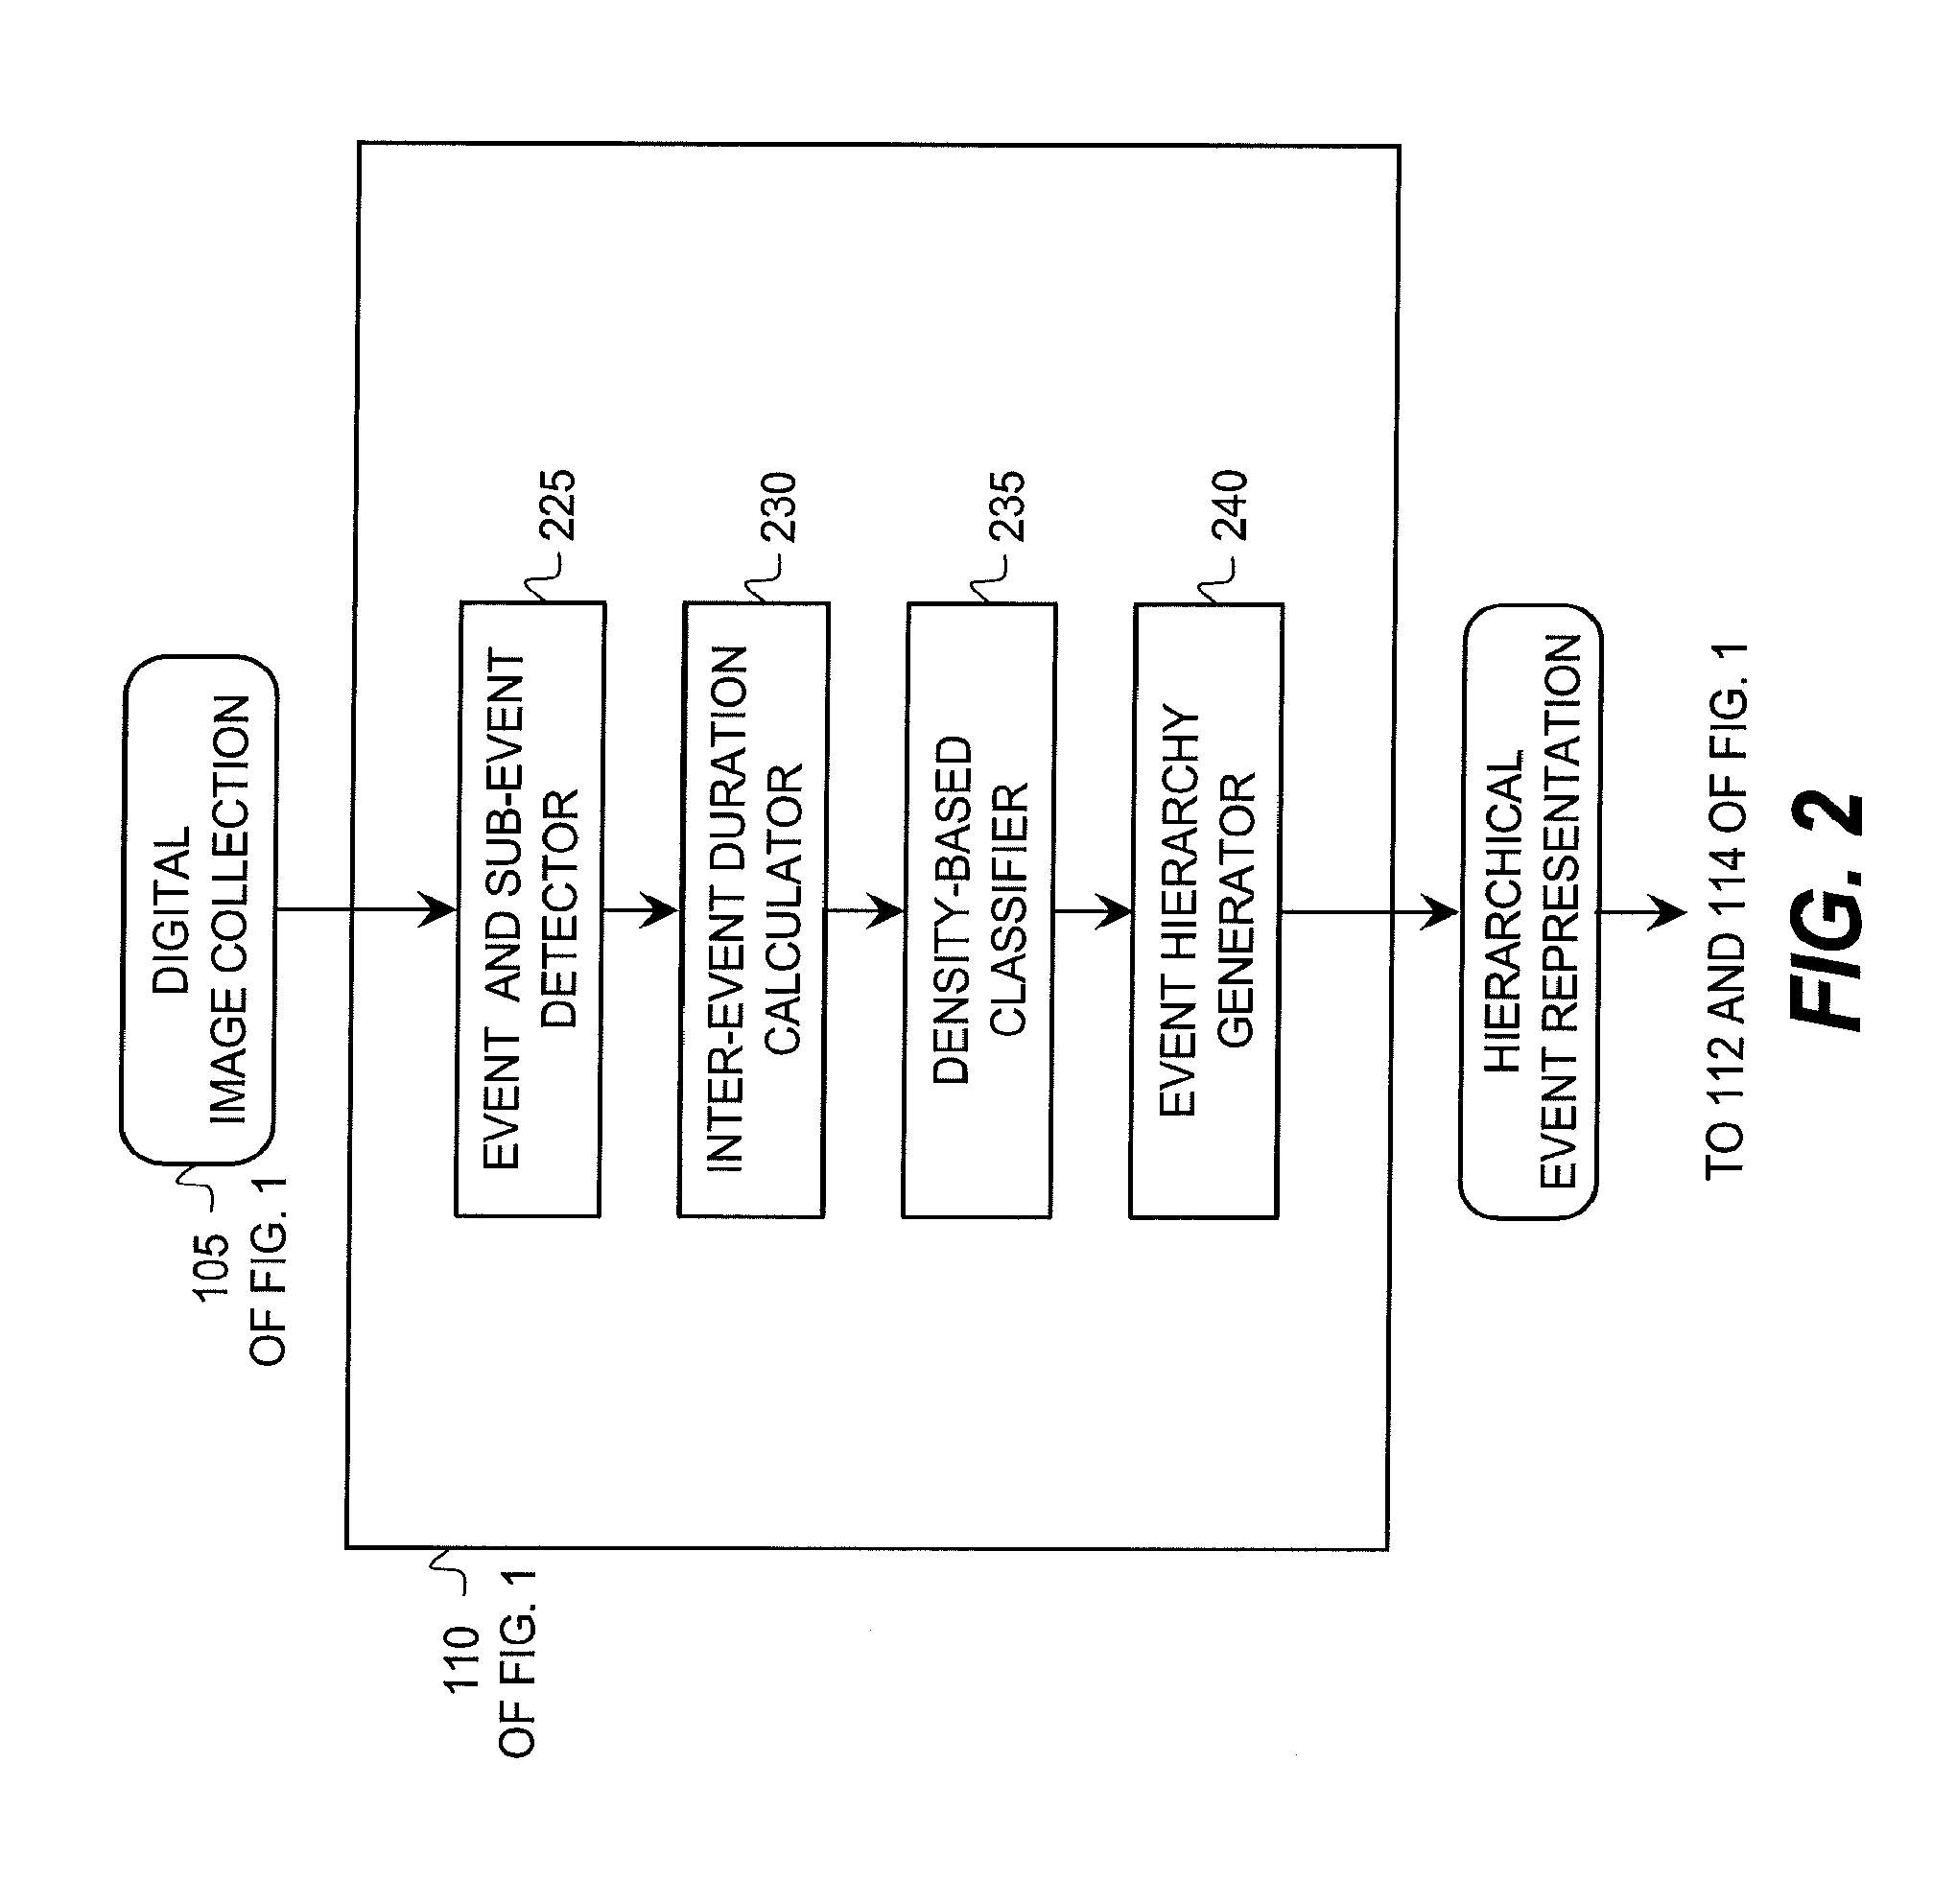 Method for event-based semantic classification